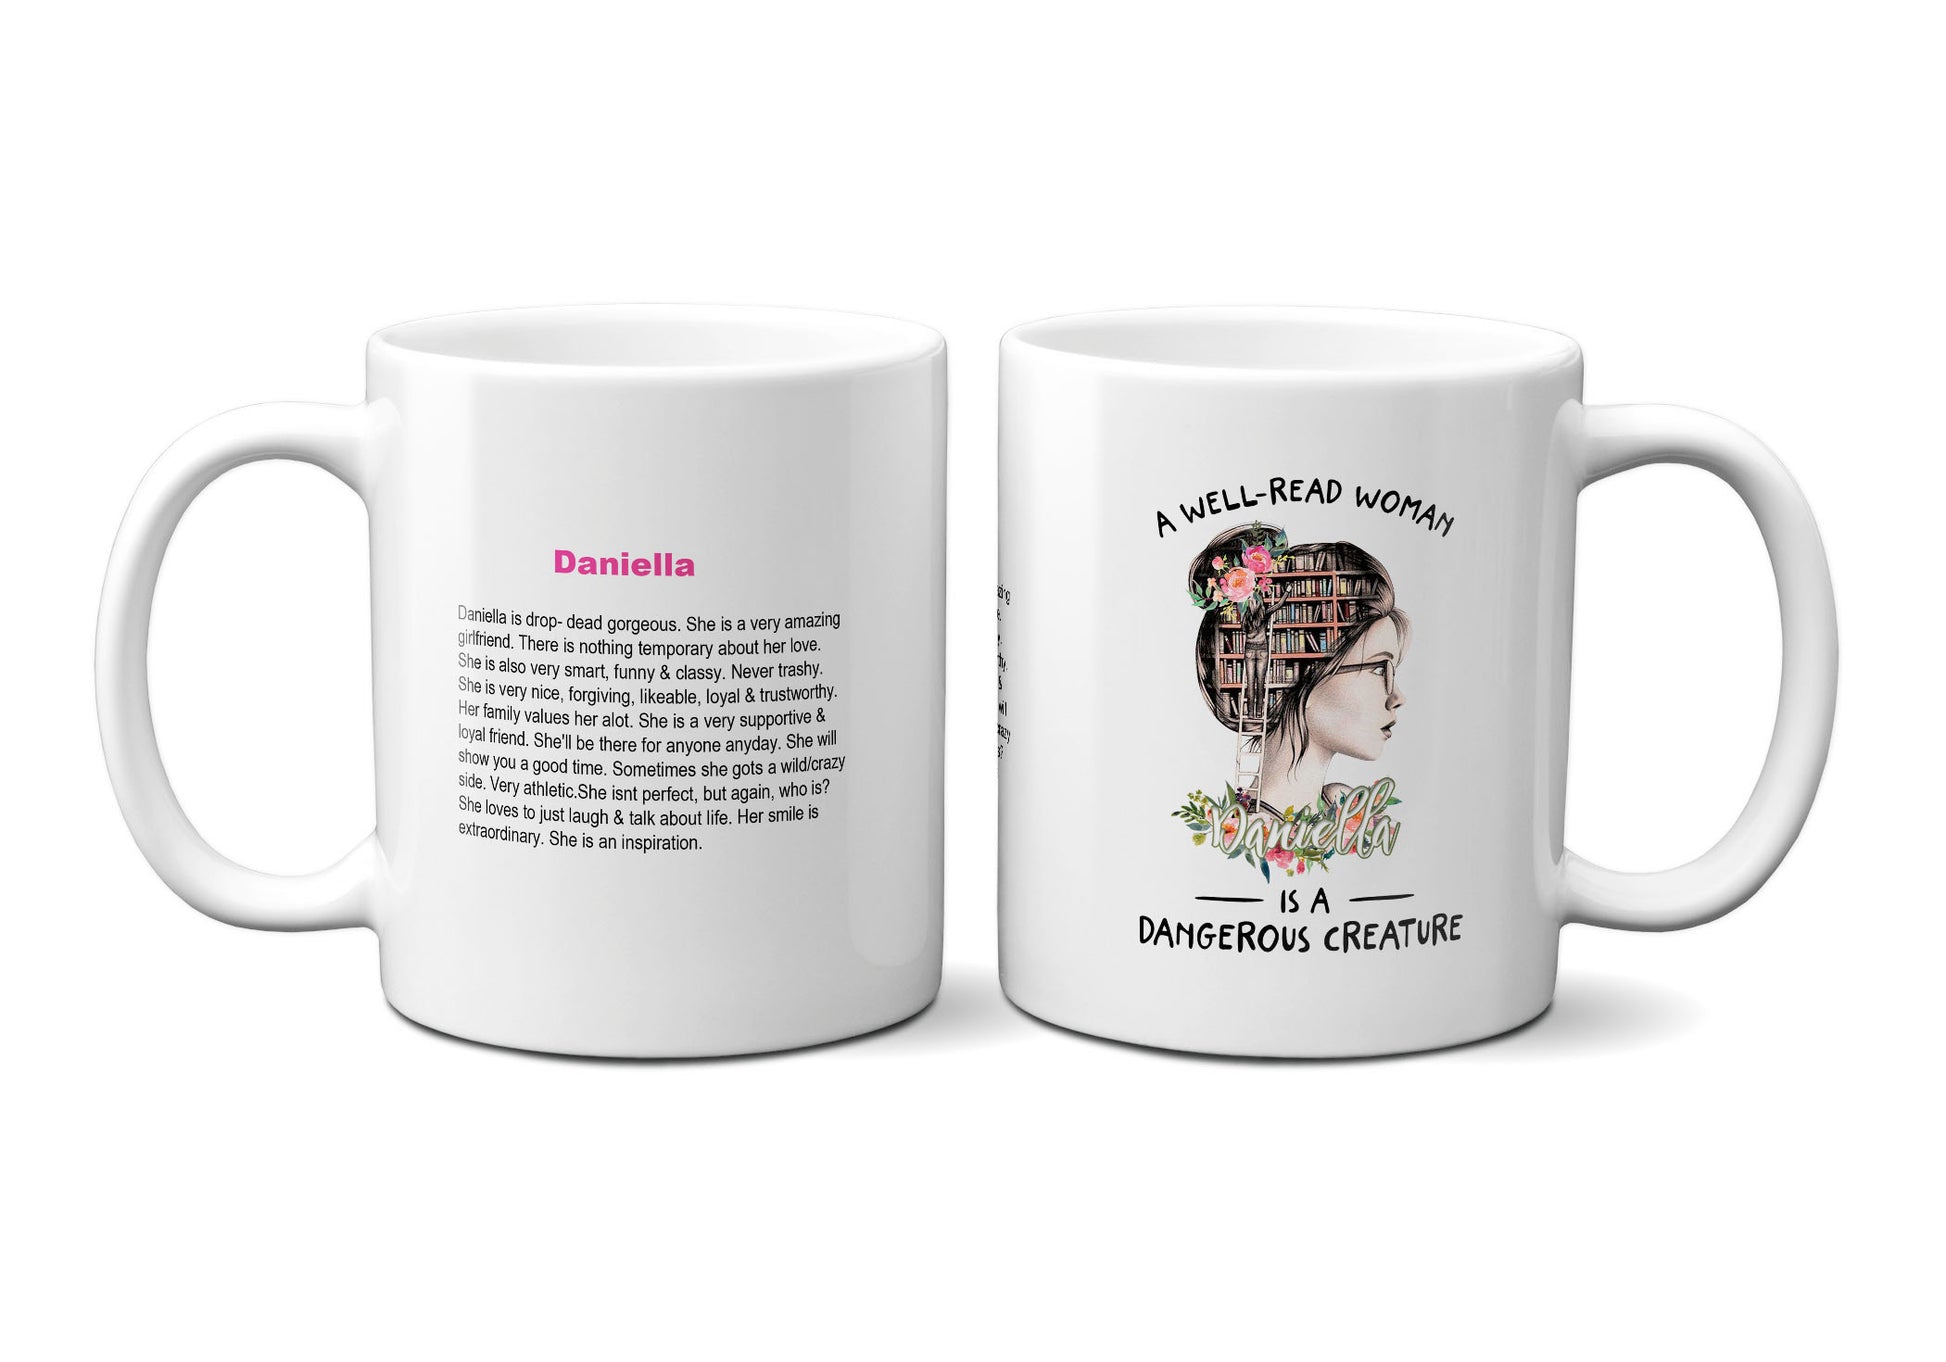 Custom Ceramic Mug for Librarian Thank You Gift, Personalized Gift for Book Nerd, Literary Gift Ideas - Busybee Creates